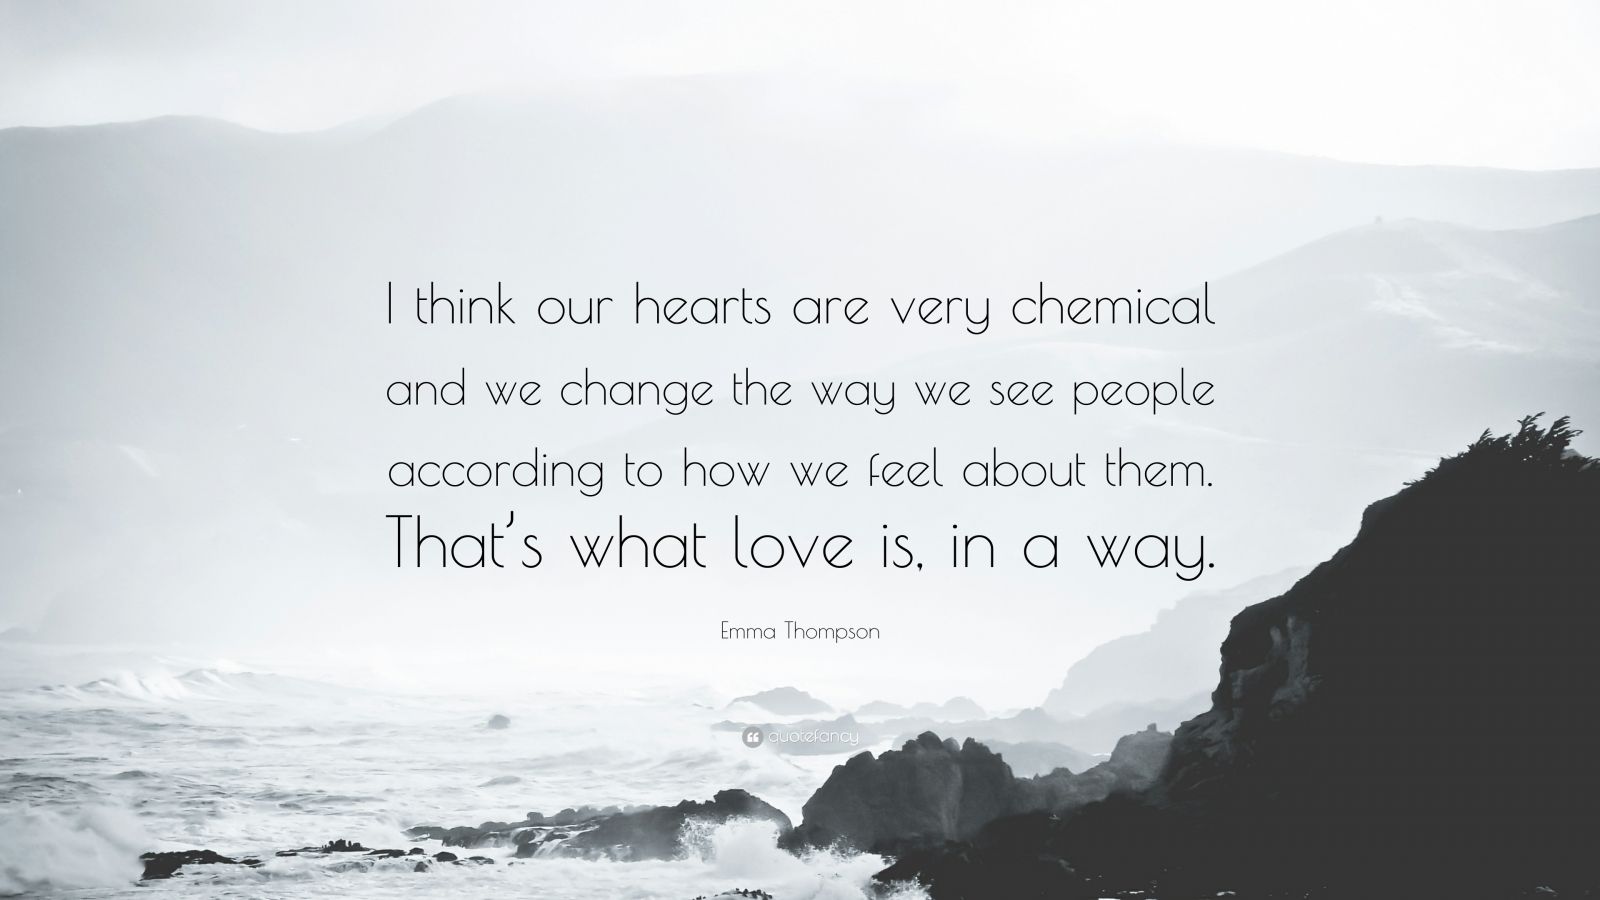 Emma Thompson Quote: “I think our hearts are very chemical and we change the way we see people according to how we feel about them. That's wha.” (7 wallpaper)